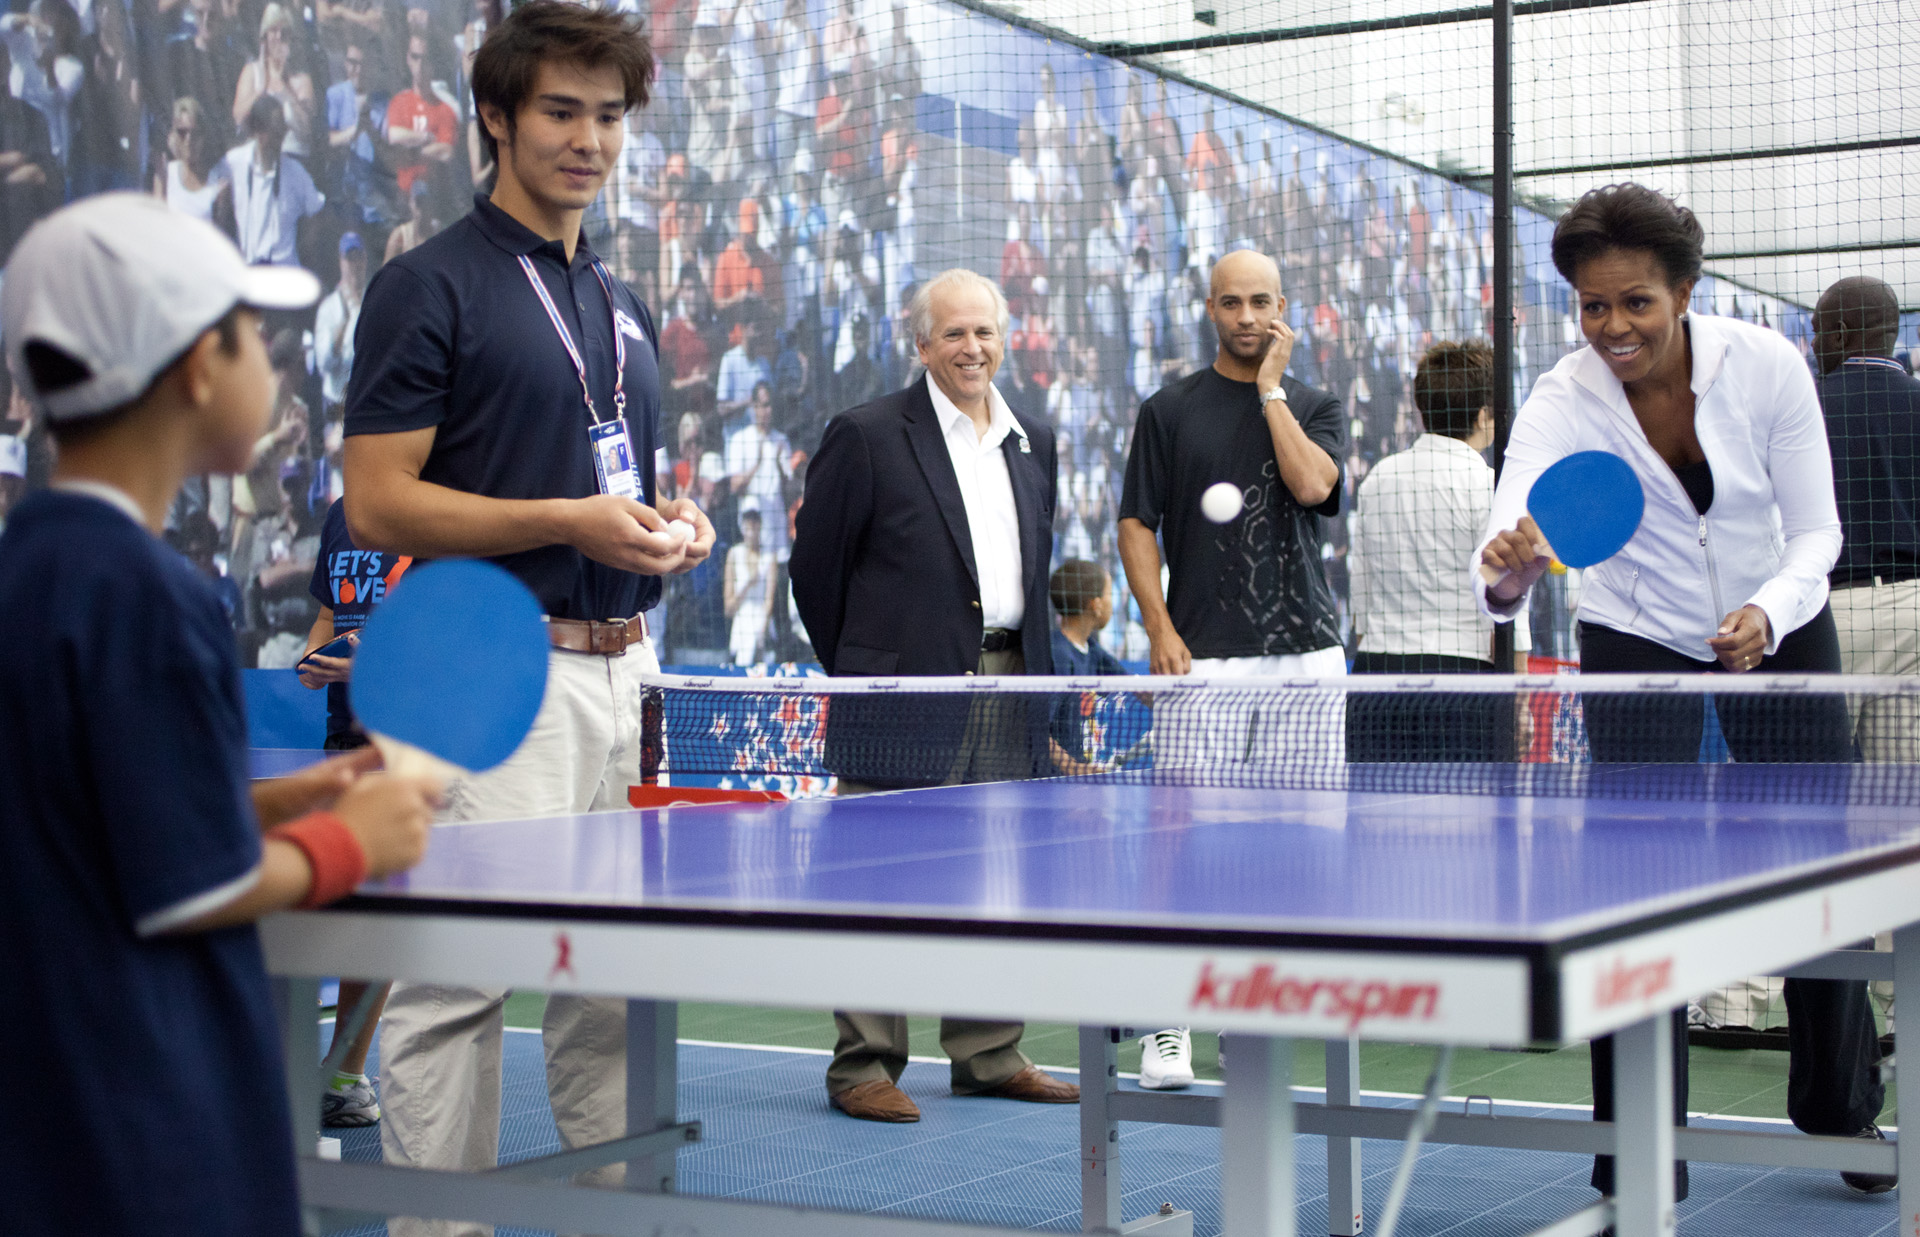 First Lady Michelle Obama plays Table Tennis